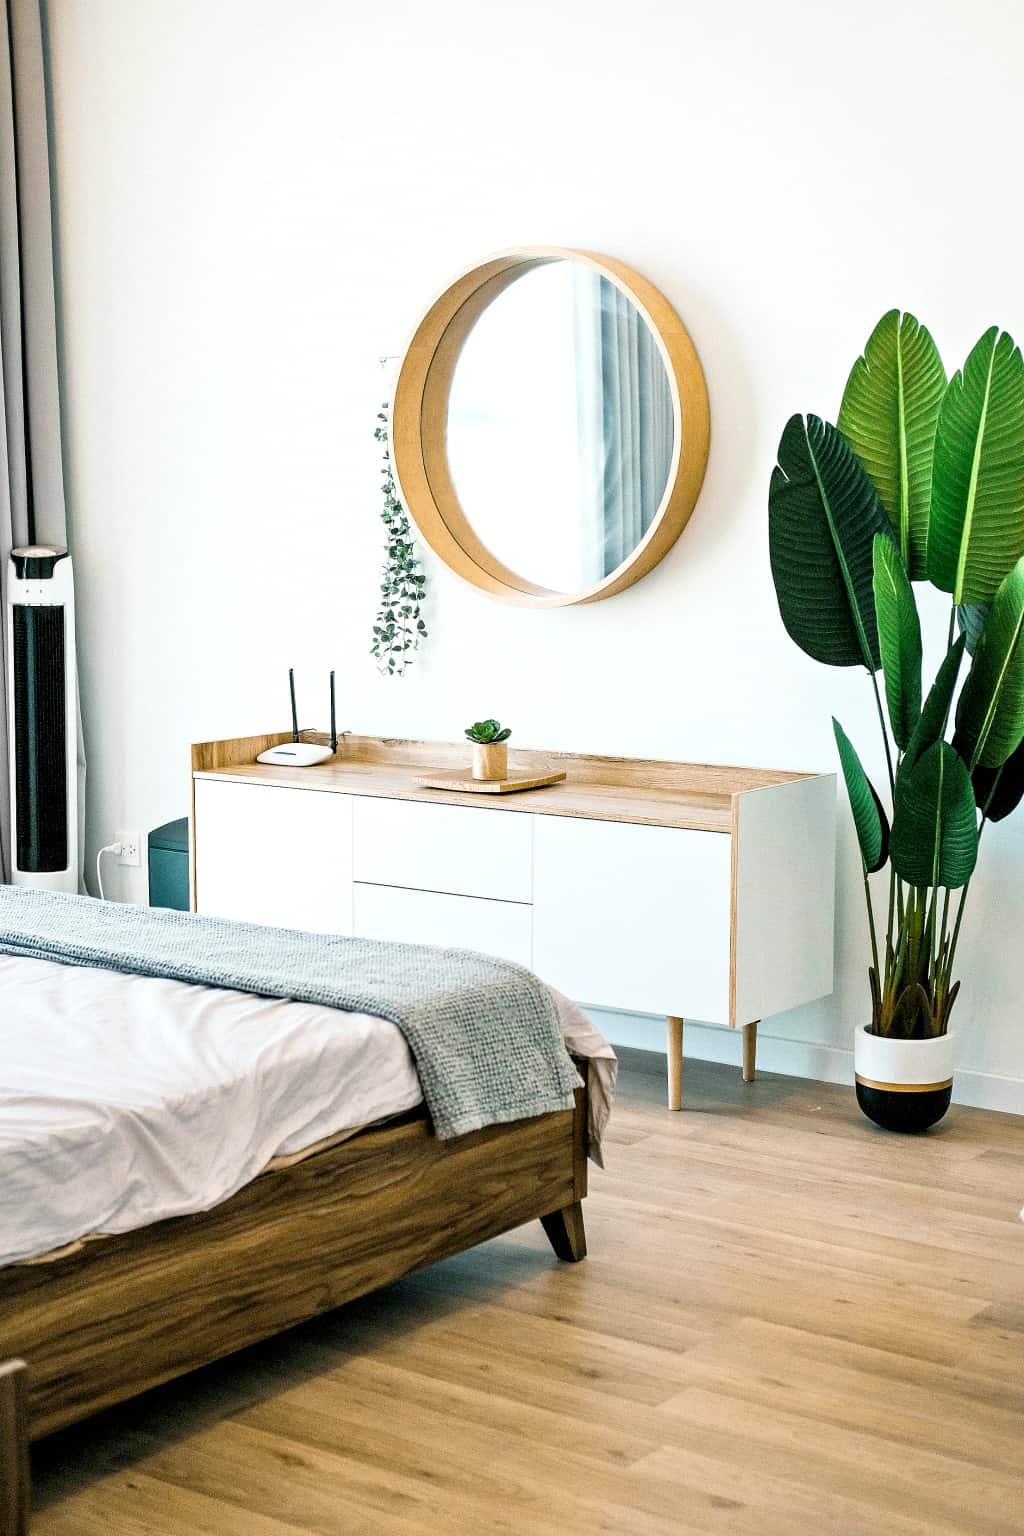 A decluttered bedroom with round mirror and plants